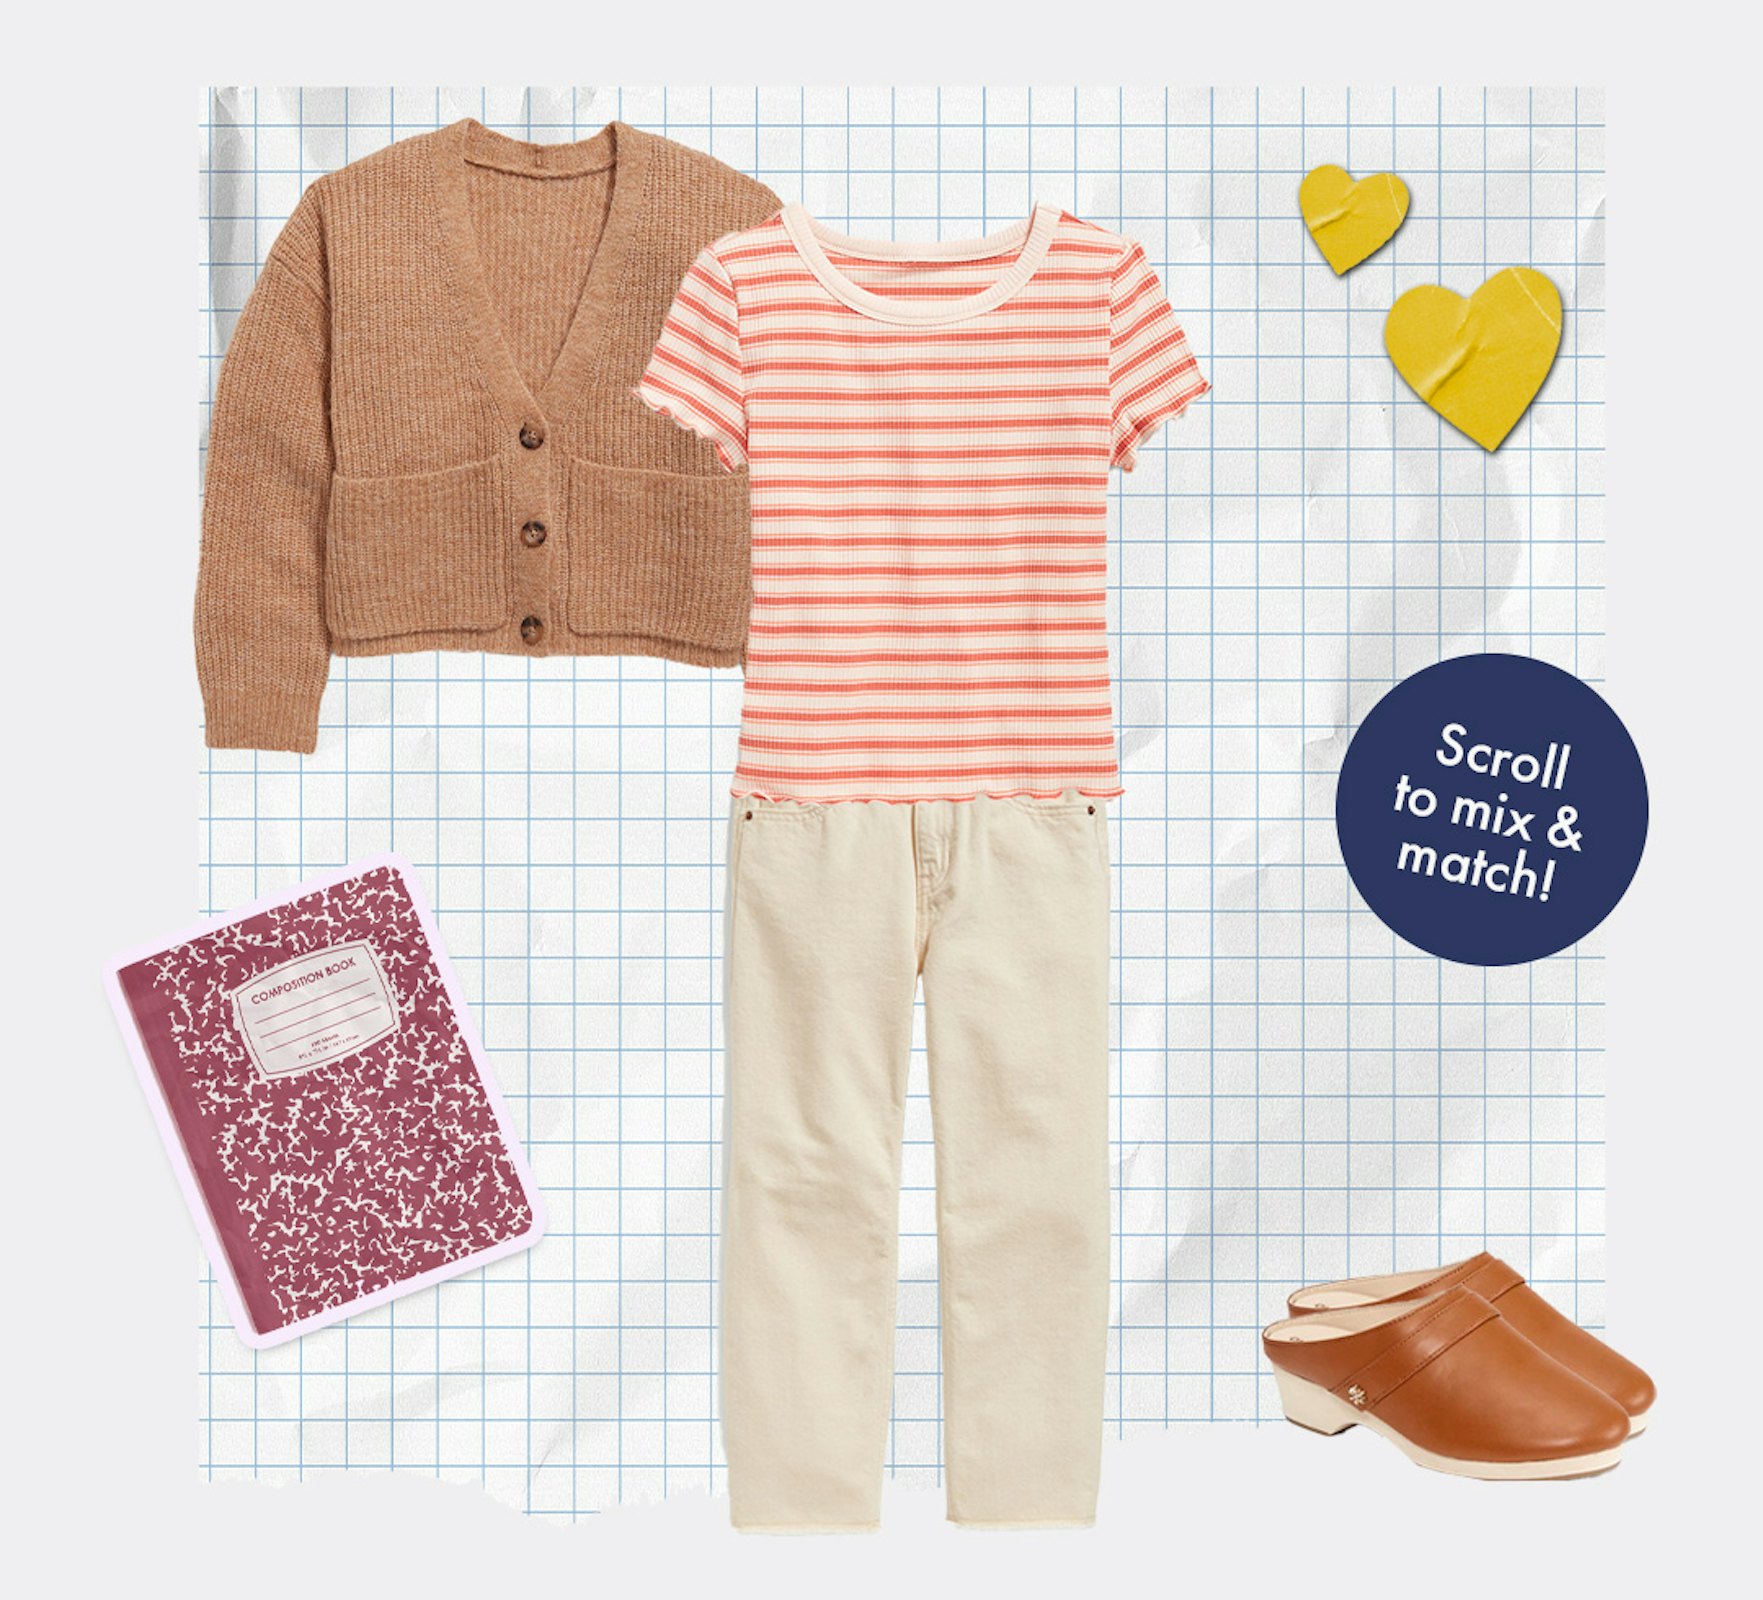 A tan knit sweater, a white-peach striped shirt, white denim jeans and brown clog shoes